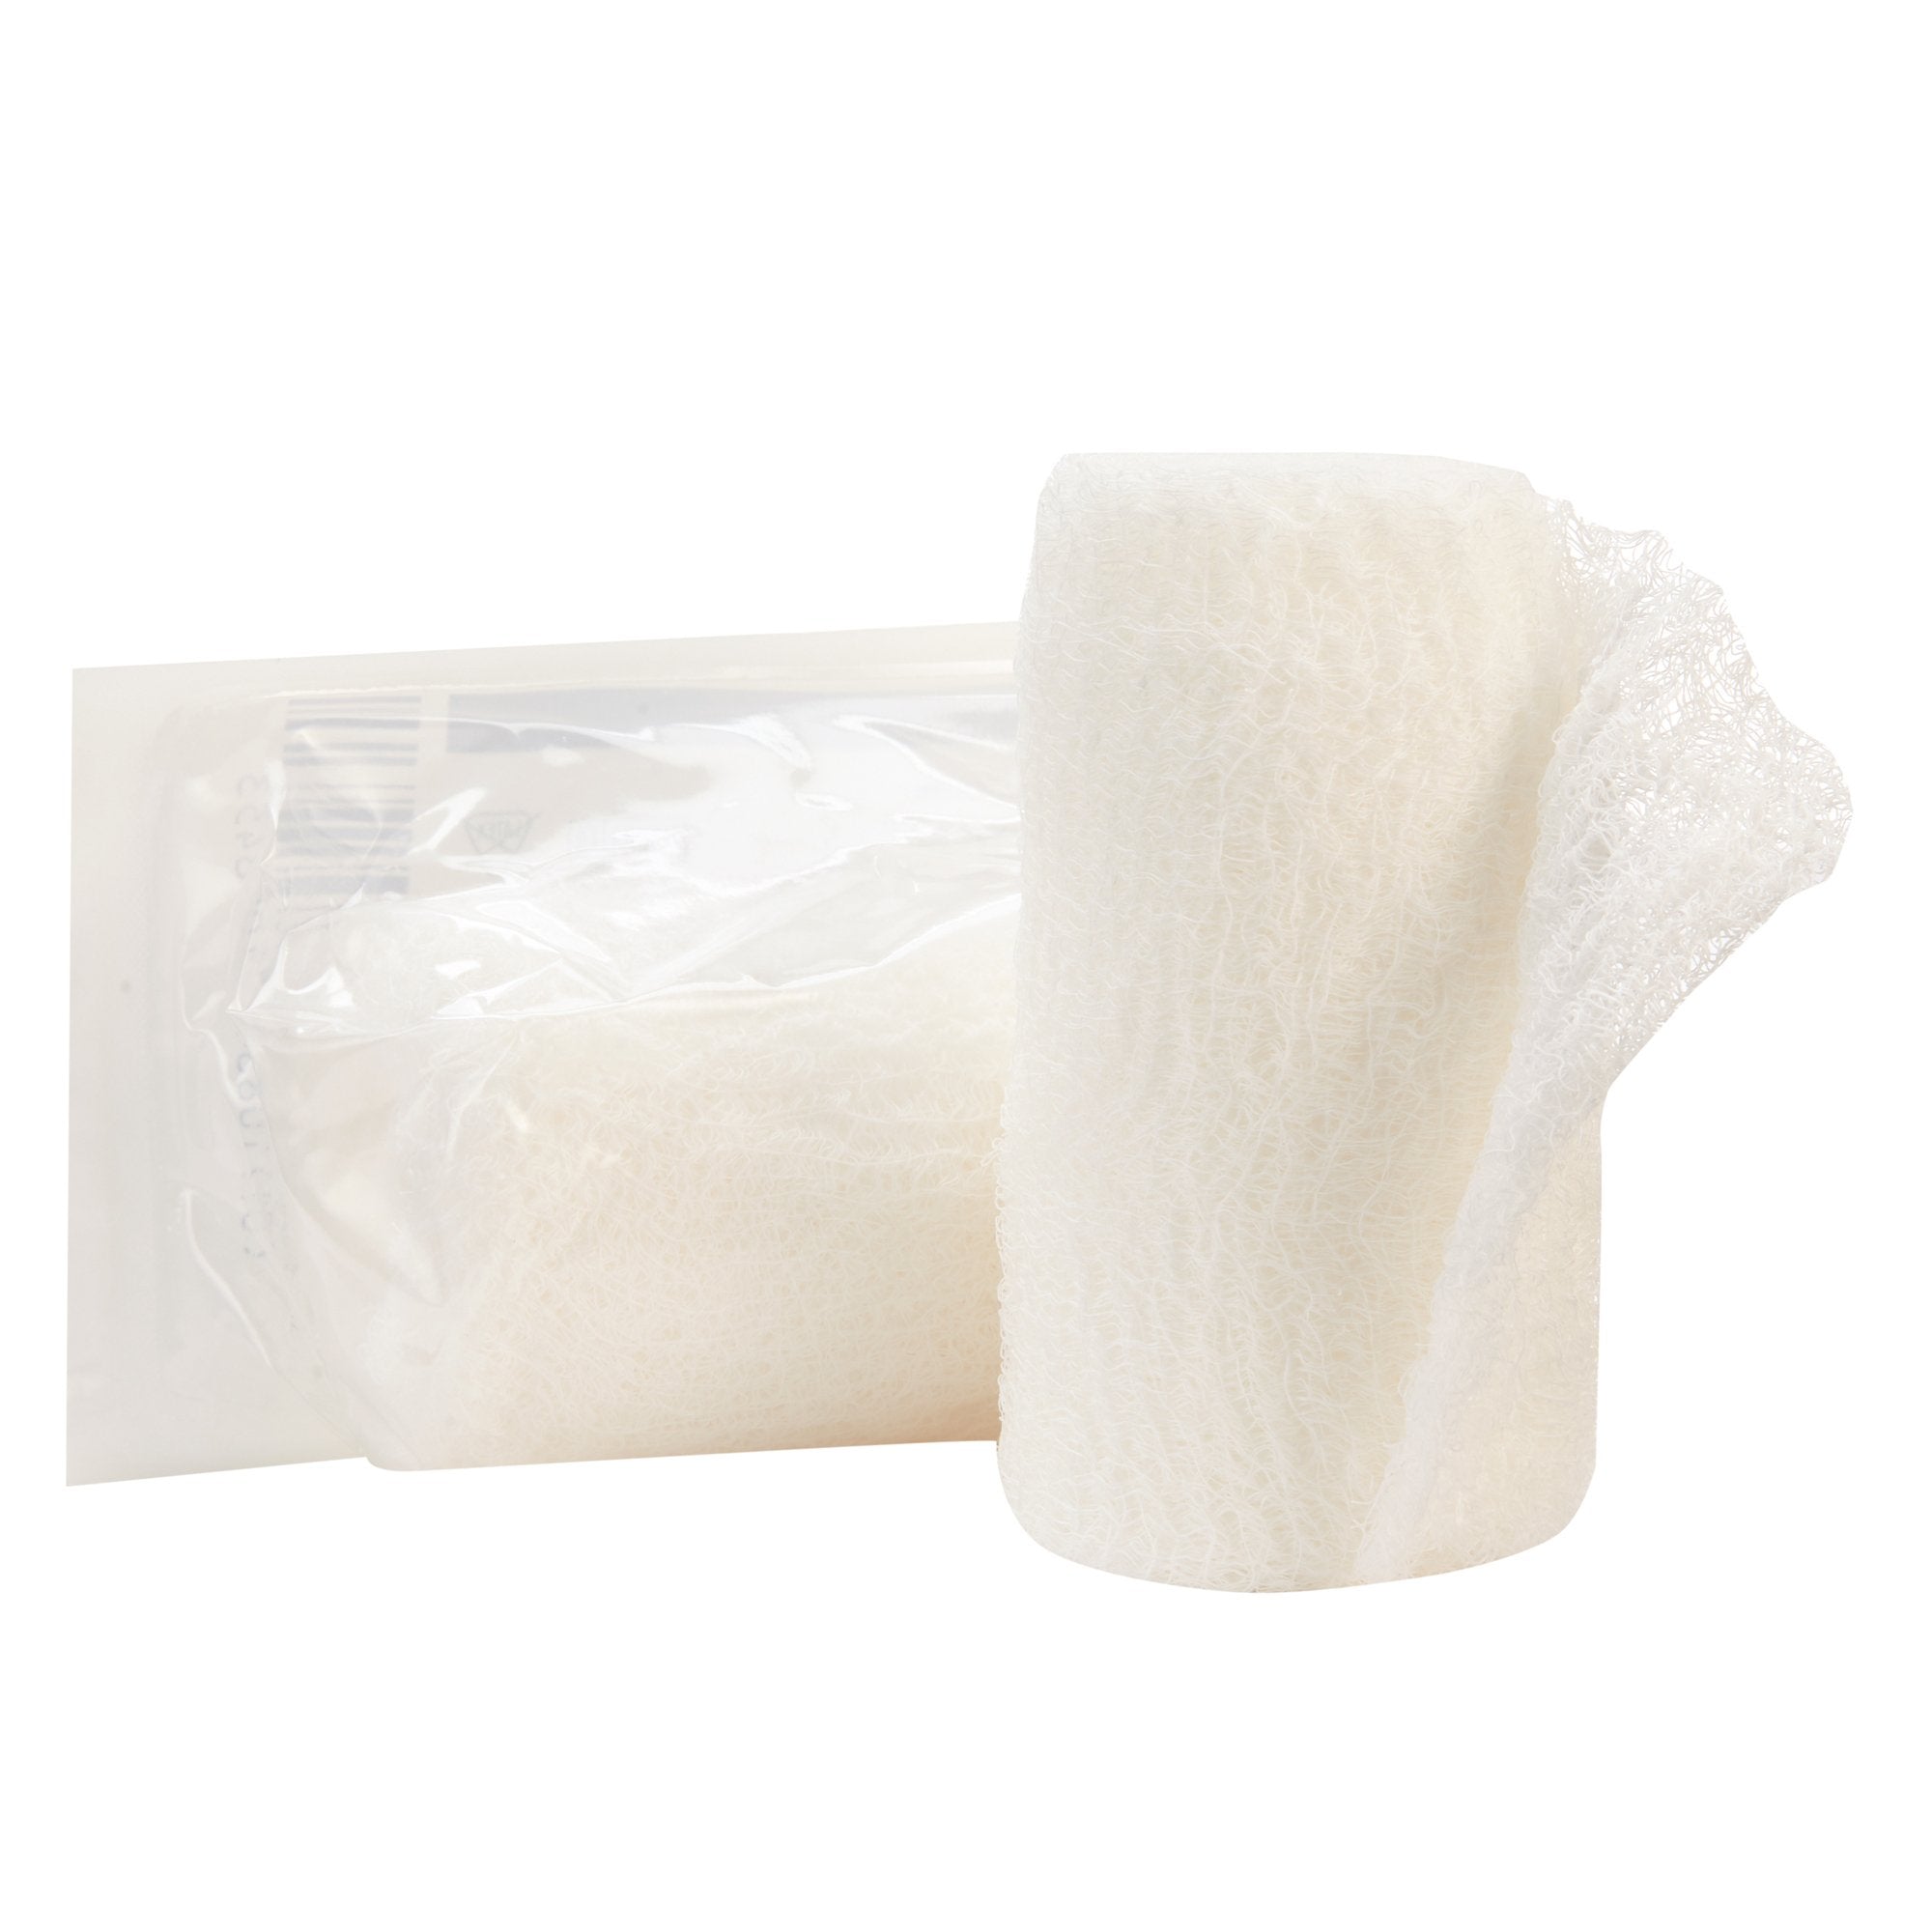 Wound Care>Gauze>Conforming & Rolled Gauze - McKesson - Wasatch Medical Supply